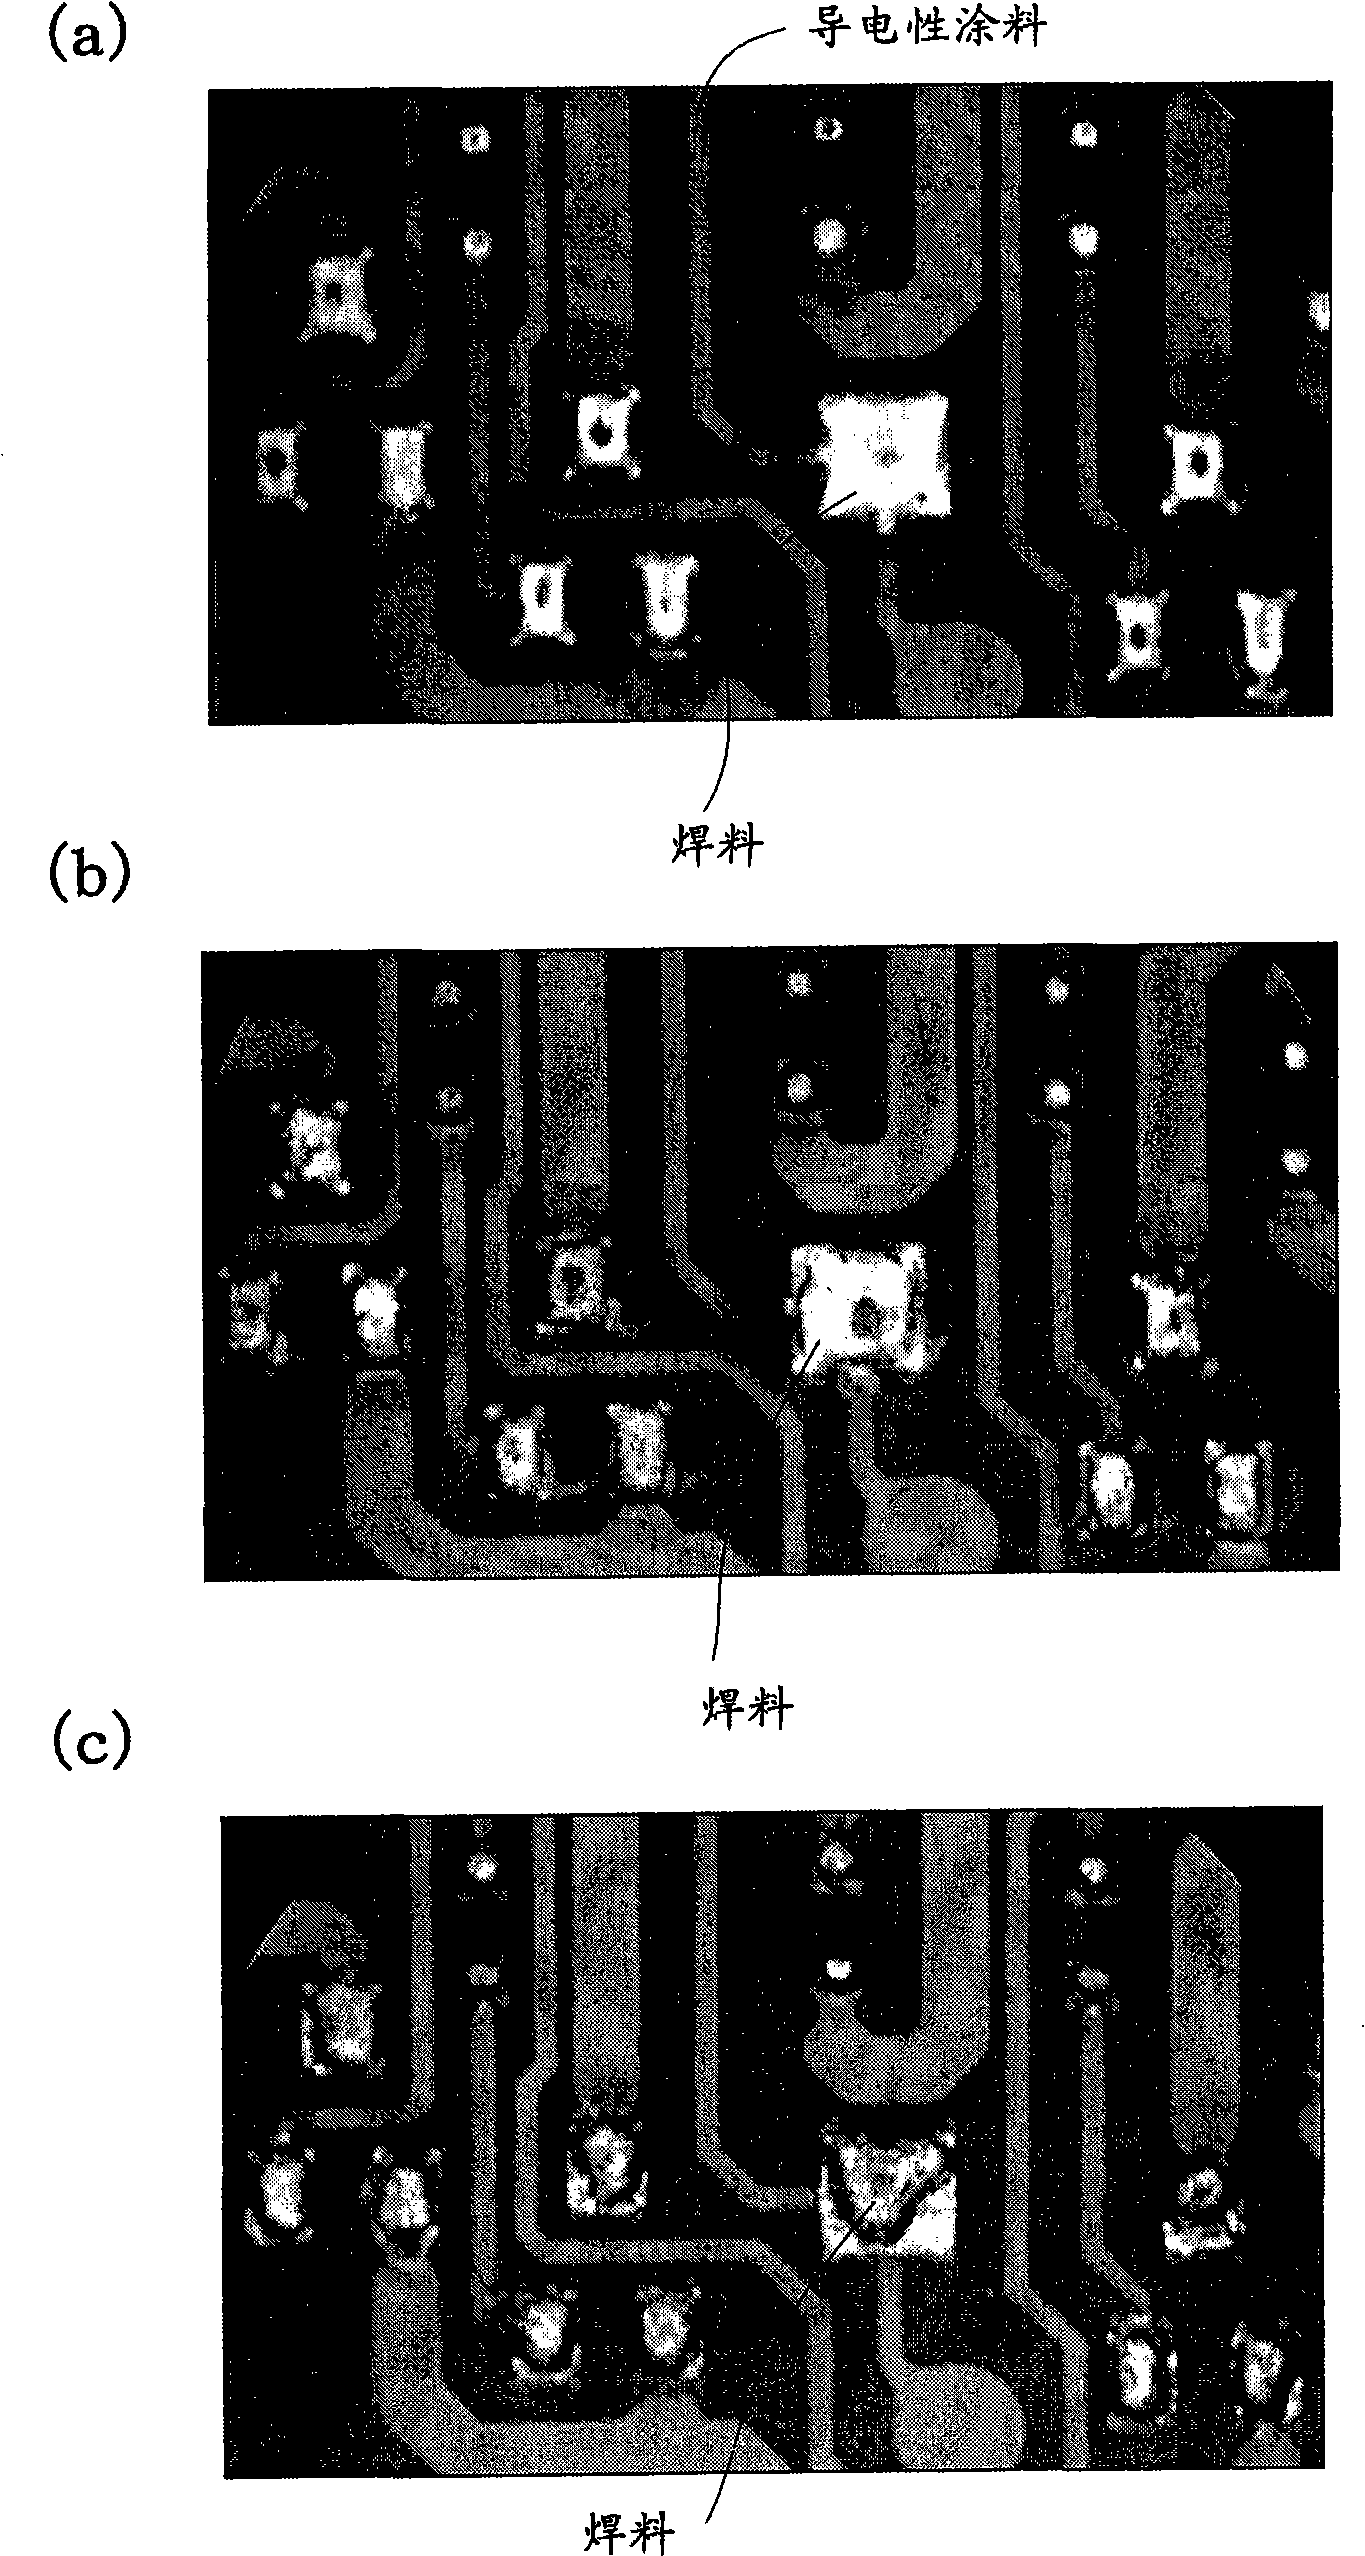 Method of reflow soldering a printed circuit board wherein an electroconductive coating material is used